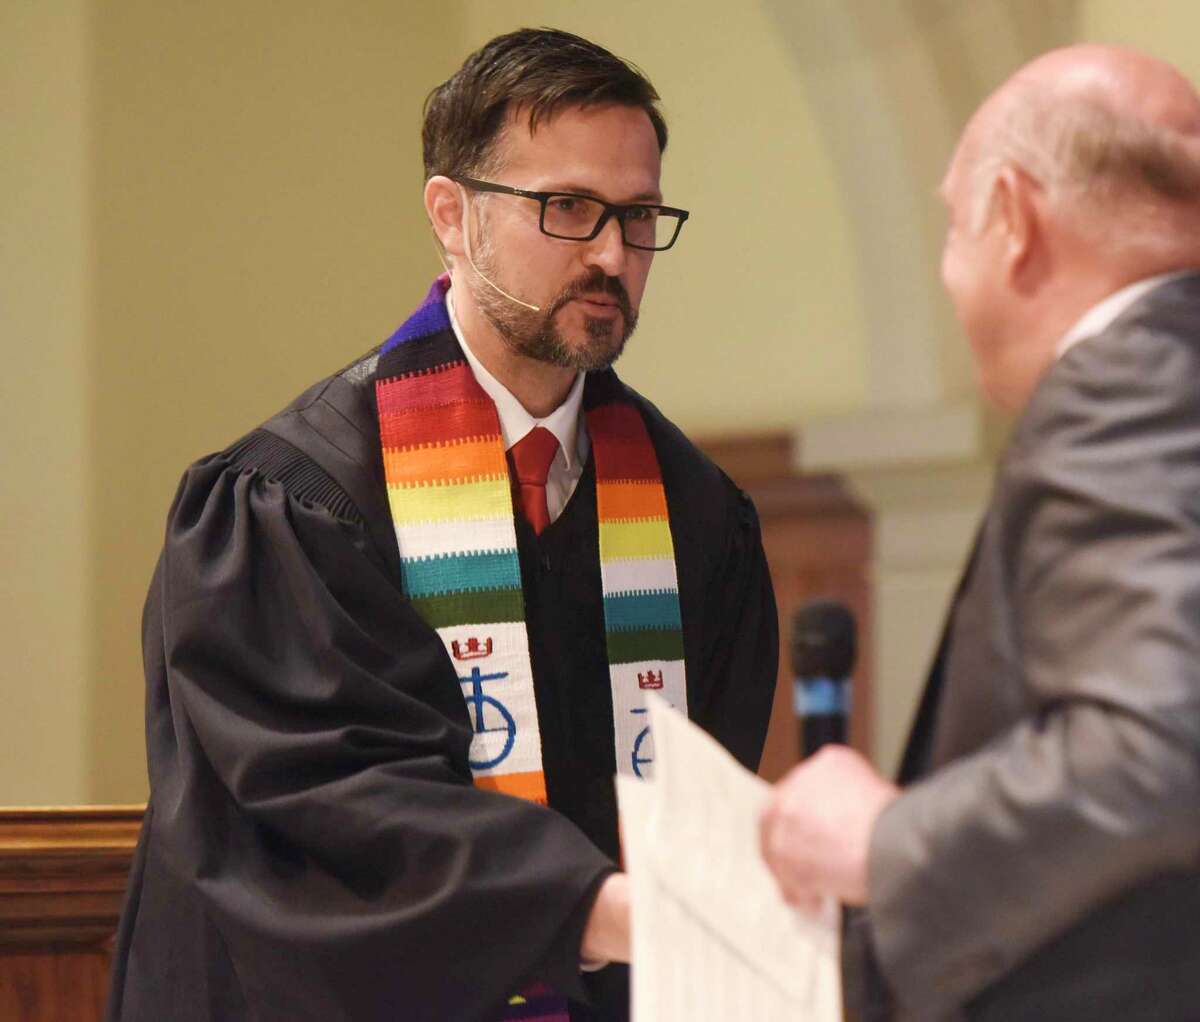 The Rev. Patrick Collins, Associate Pastor for Children, Youth and Families, is installed as a minister at First Congregational Church of Greenwich in April of 2017. It was announced Dec. 1 that the Rev. Patrick Collins, who has served as Associate Pastor since September 2016, will be the new Senior Pastor at FCCOG.